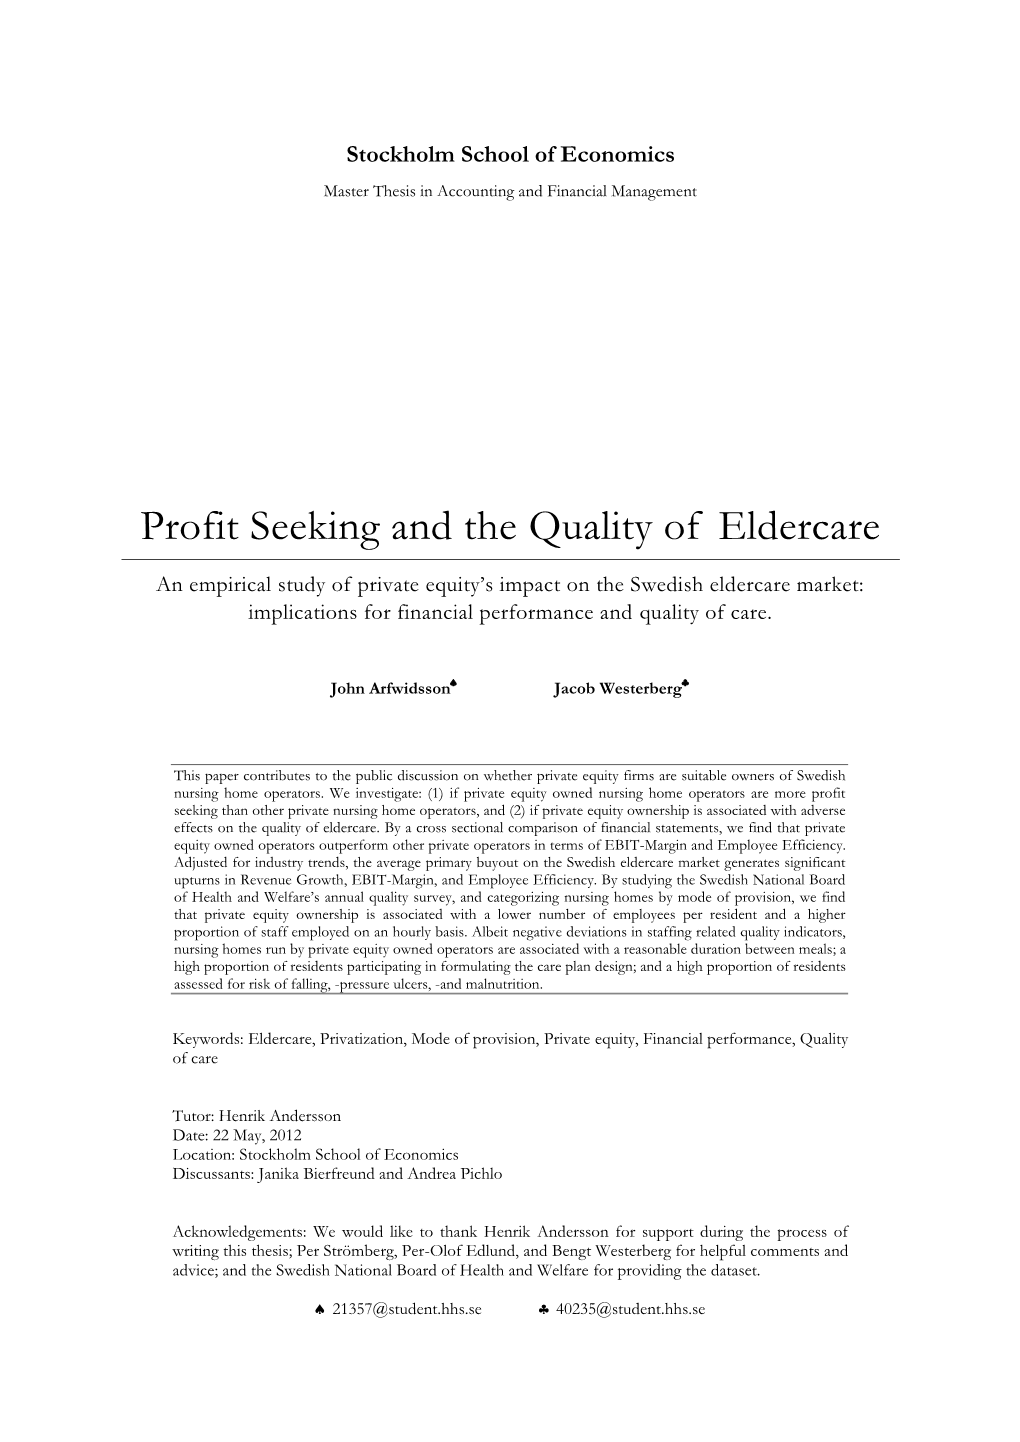 Profit Seeking and the Quality of Eldercare